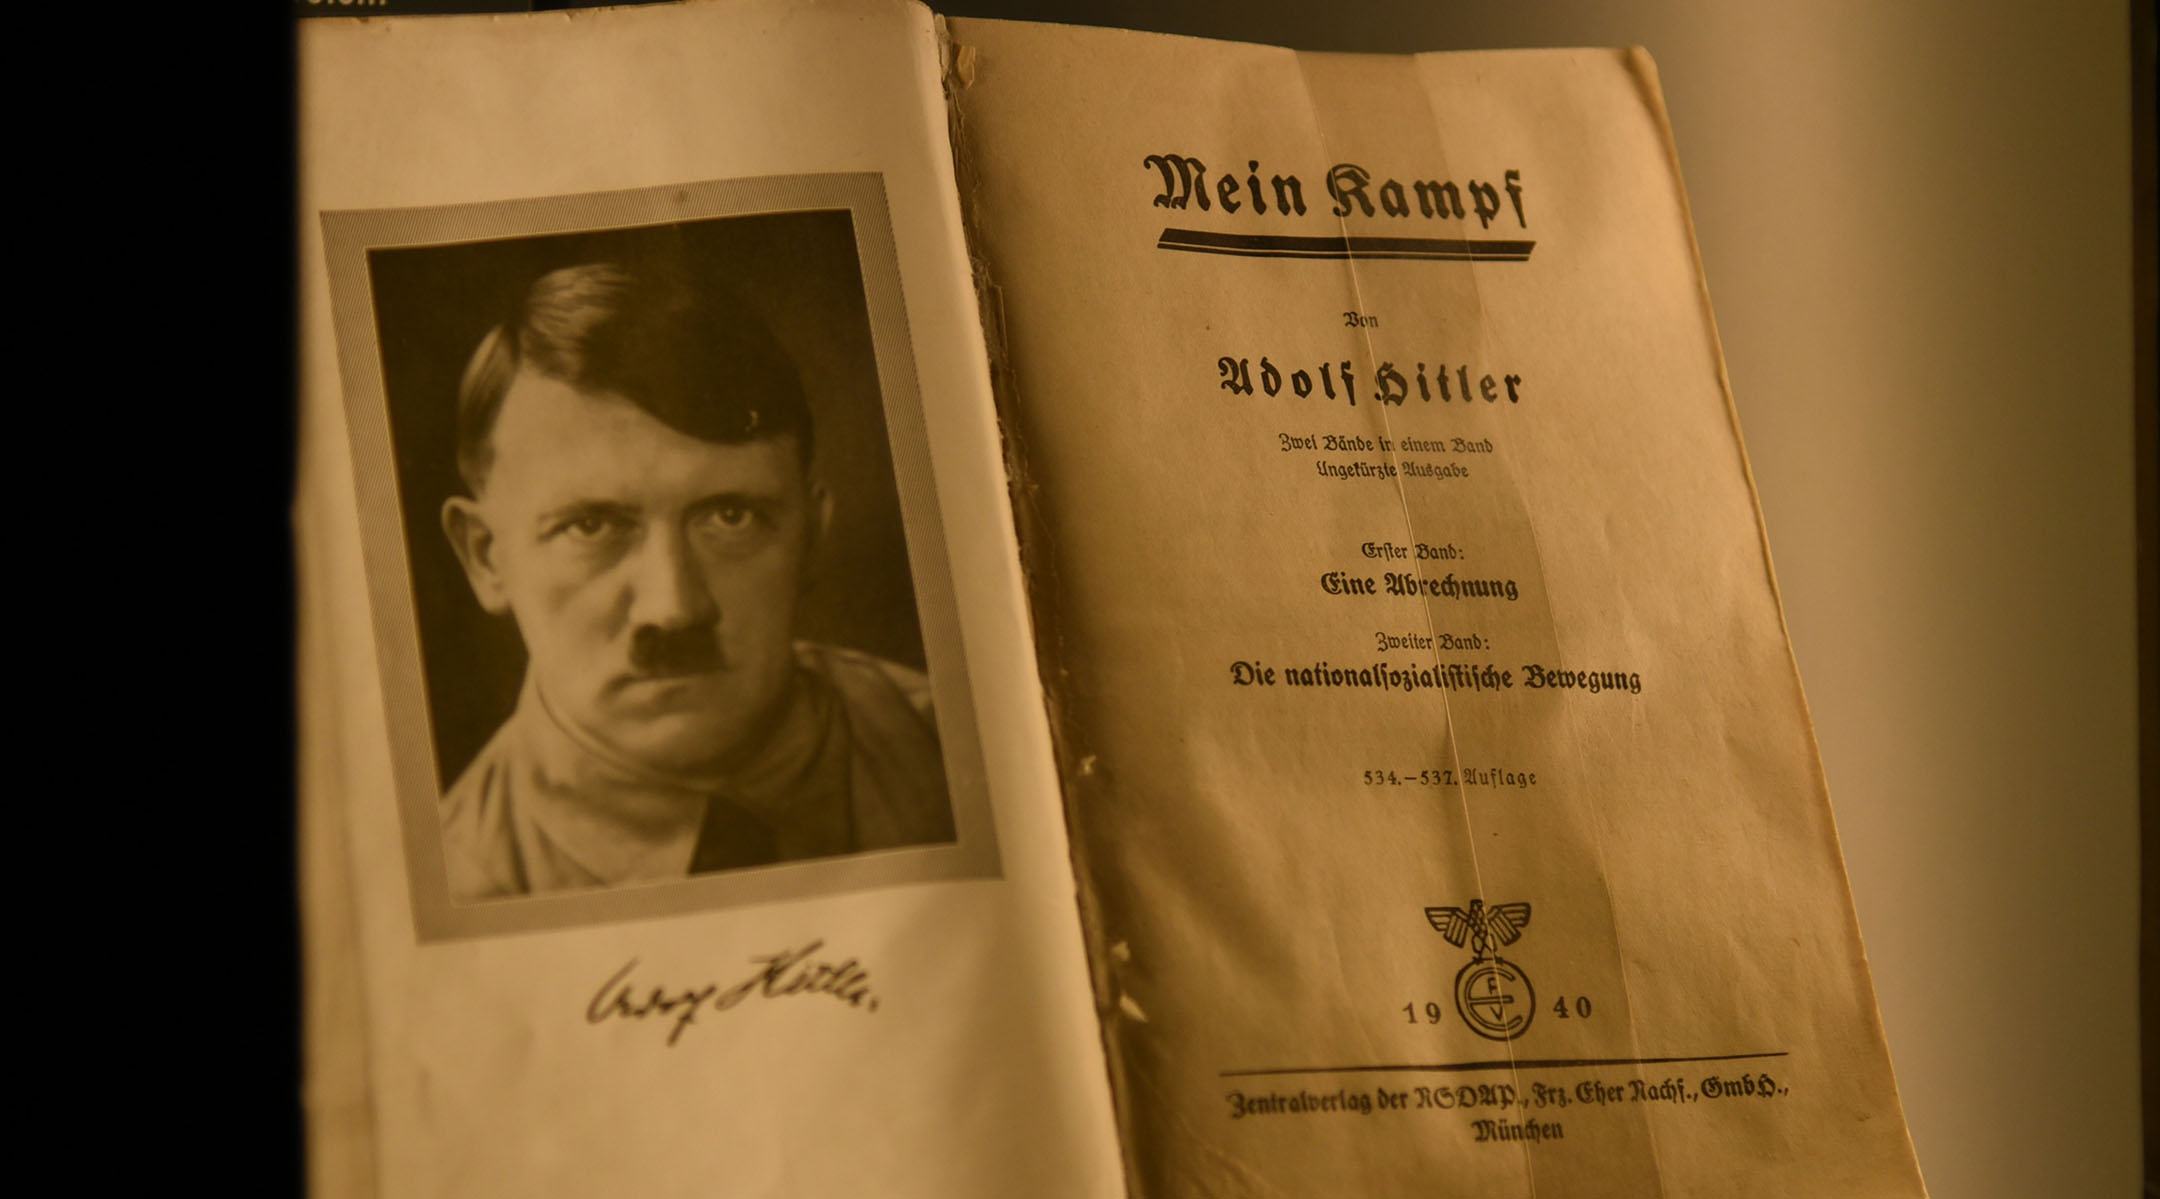 German scholars make their best-selling annotated version of Hitler’s ‘Mein Kampf’ available online for free - JTA News - Jewish Telegraphic Agency